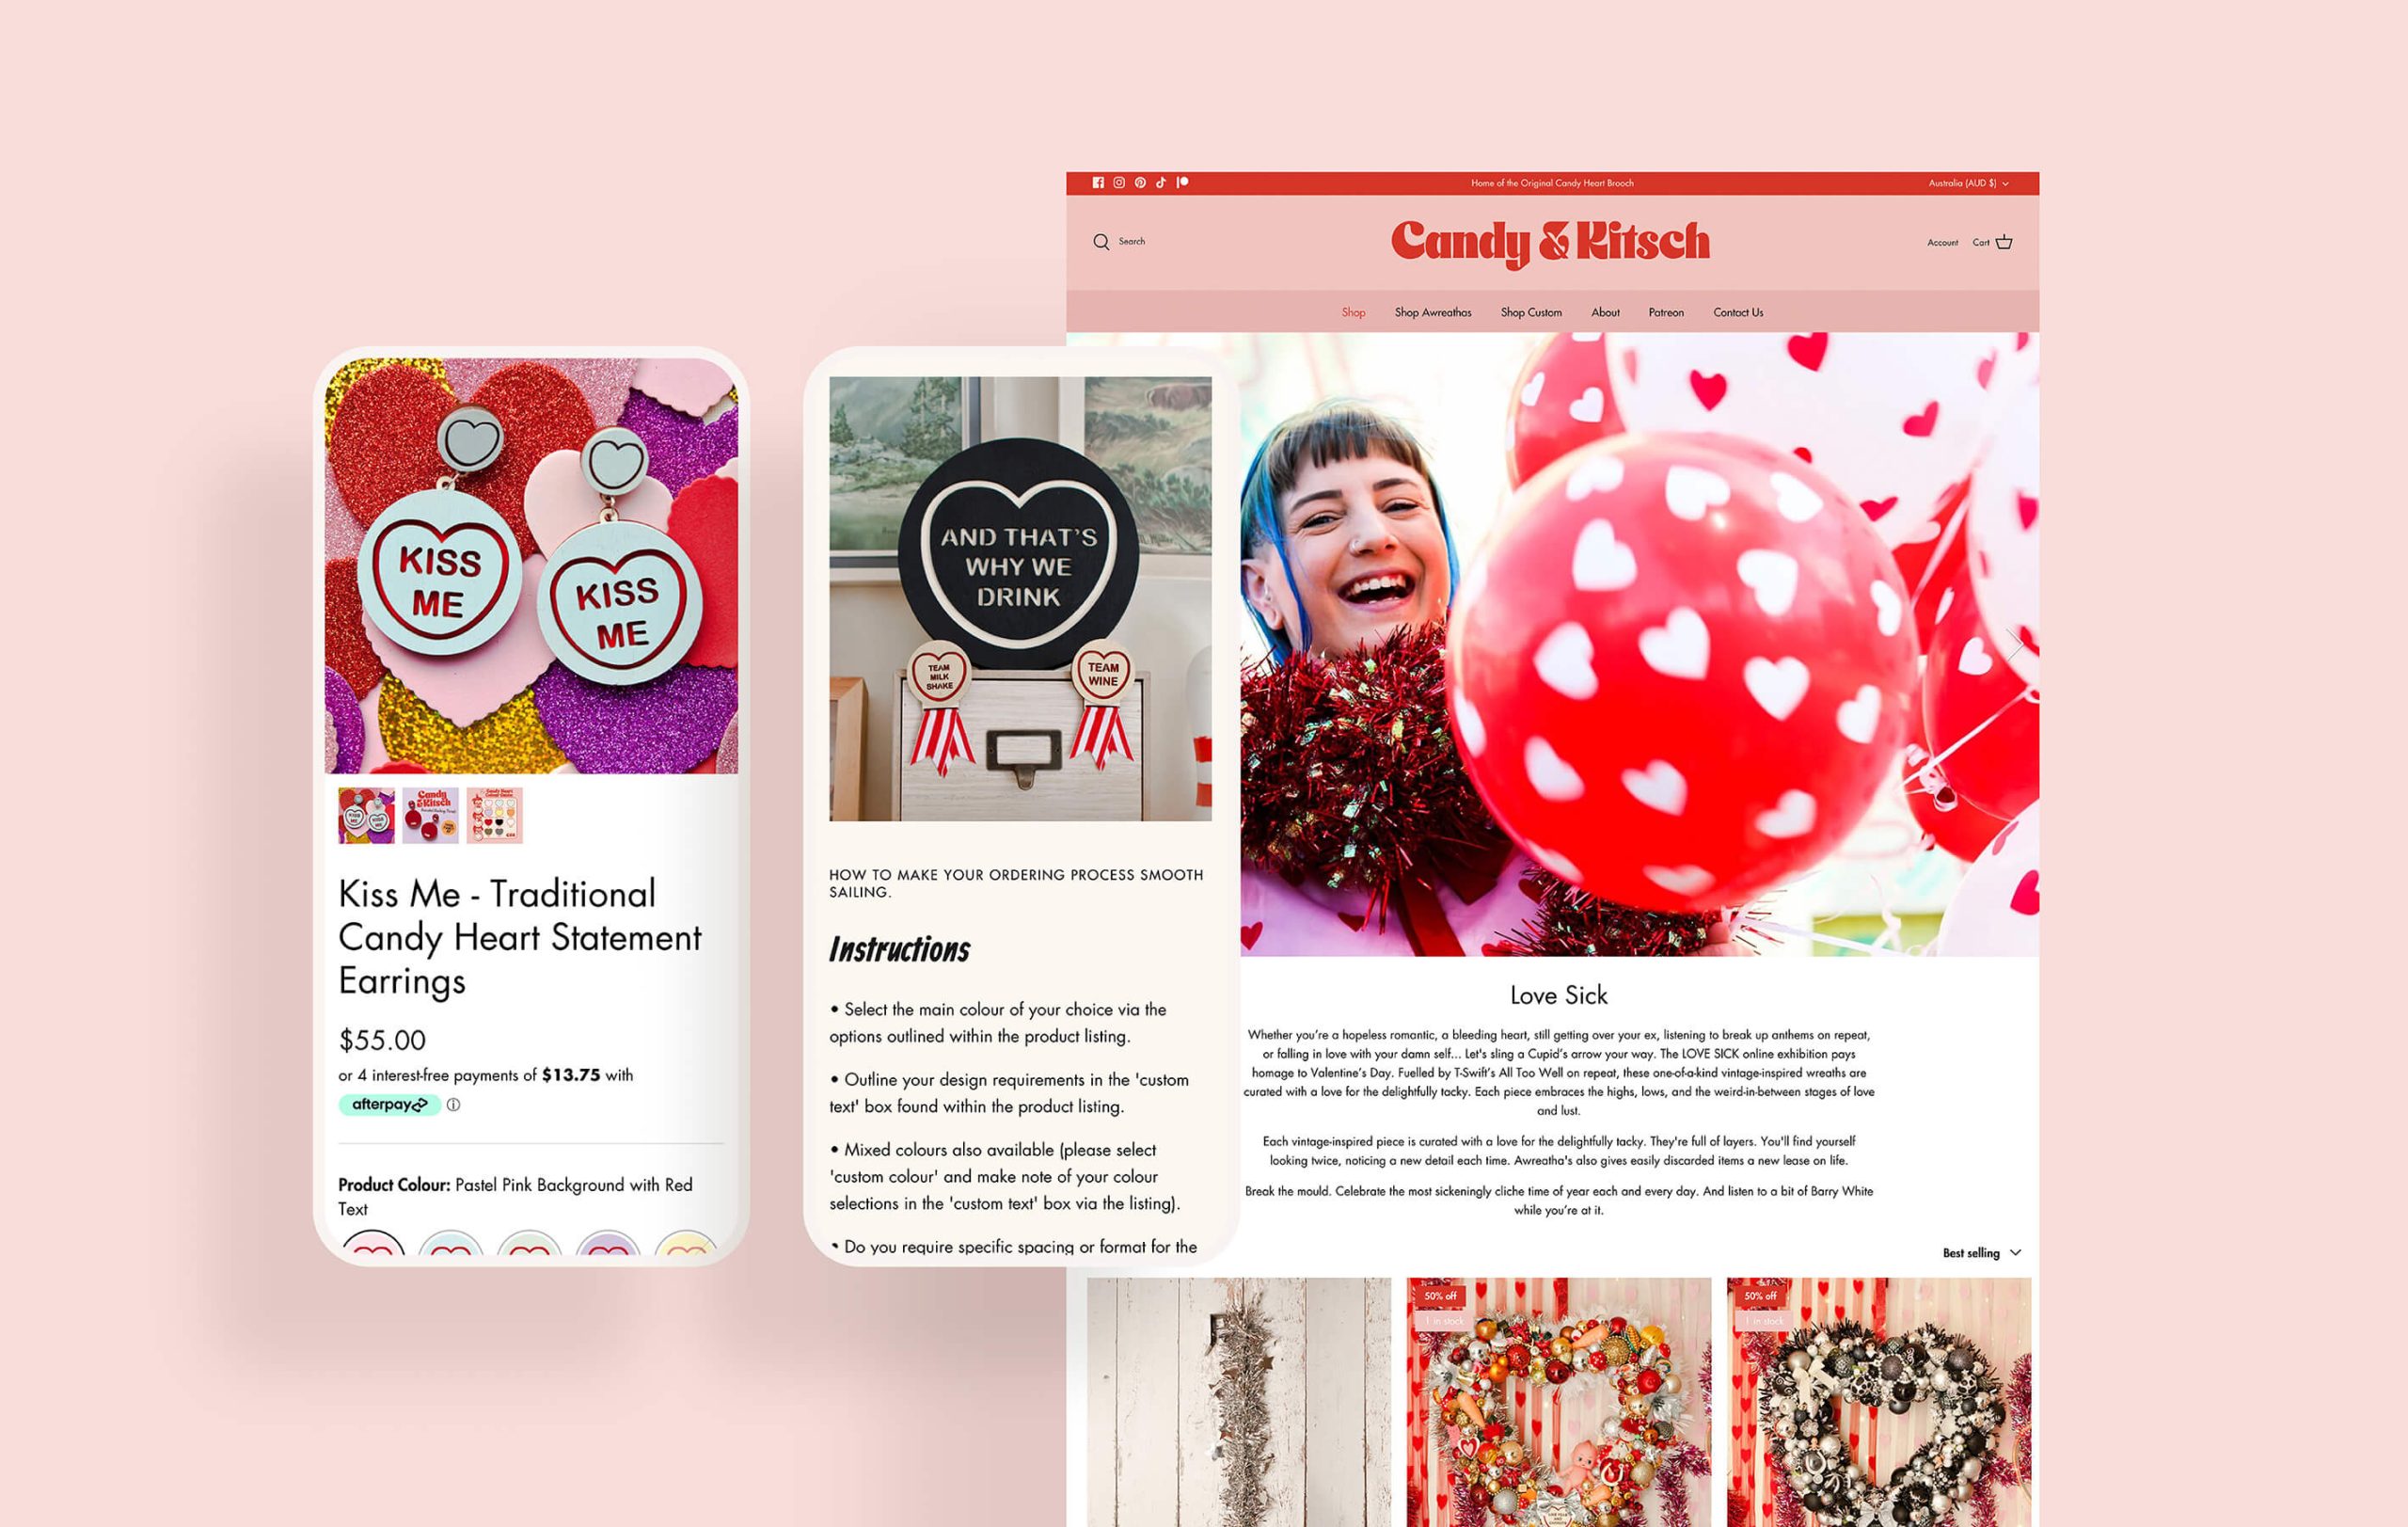 Brand identity case study image of some of Candy & Kitsch’s product and content pages on desktop and mobile.